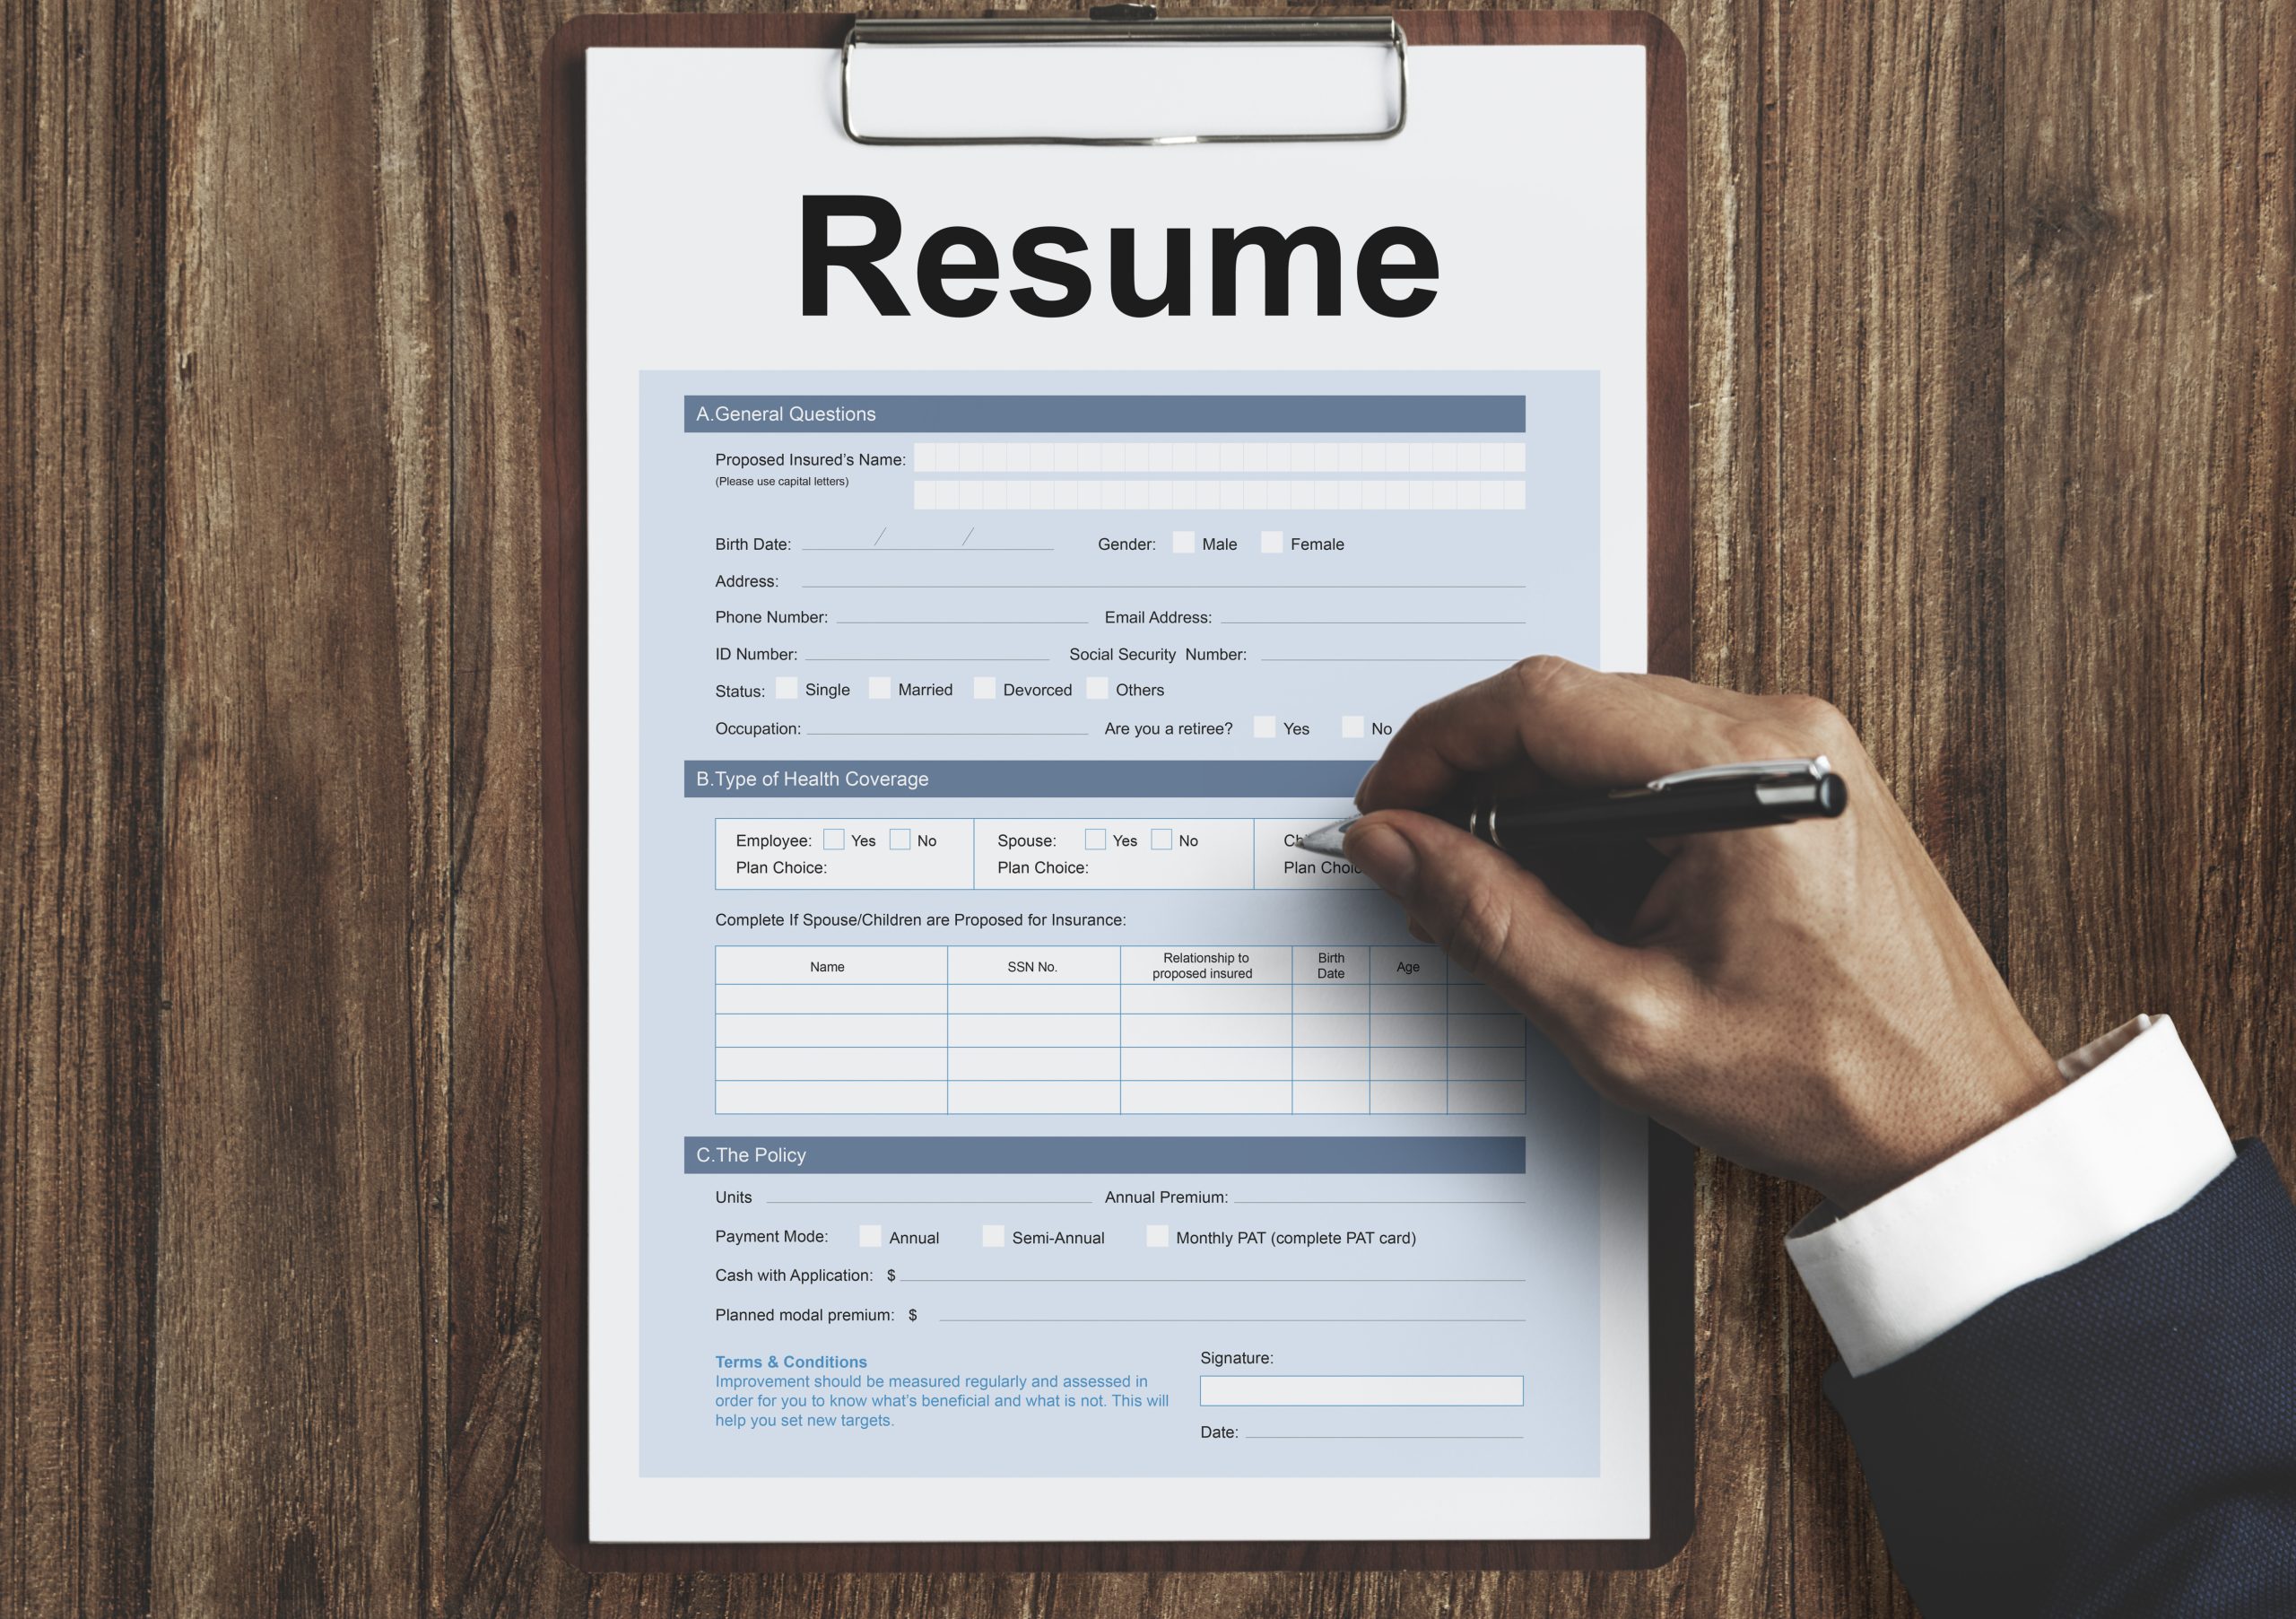 resumes federal are detailed